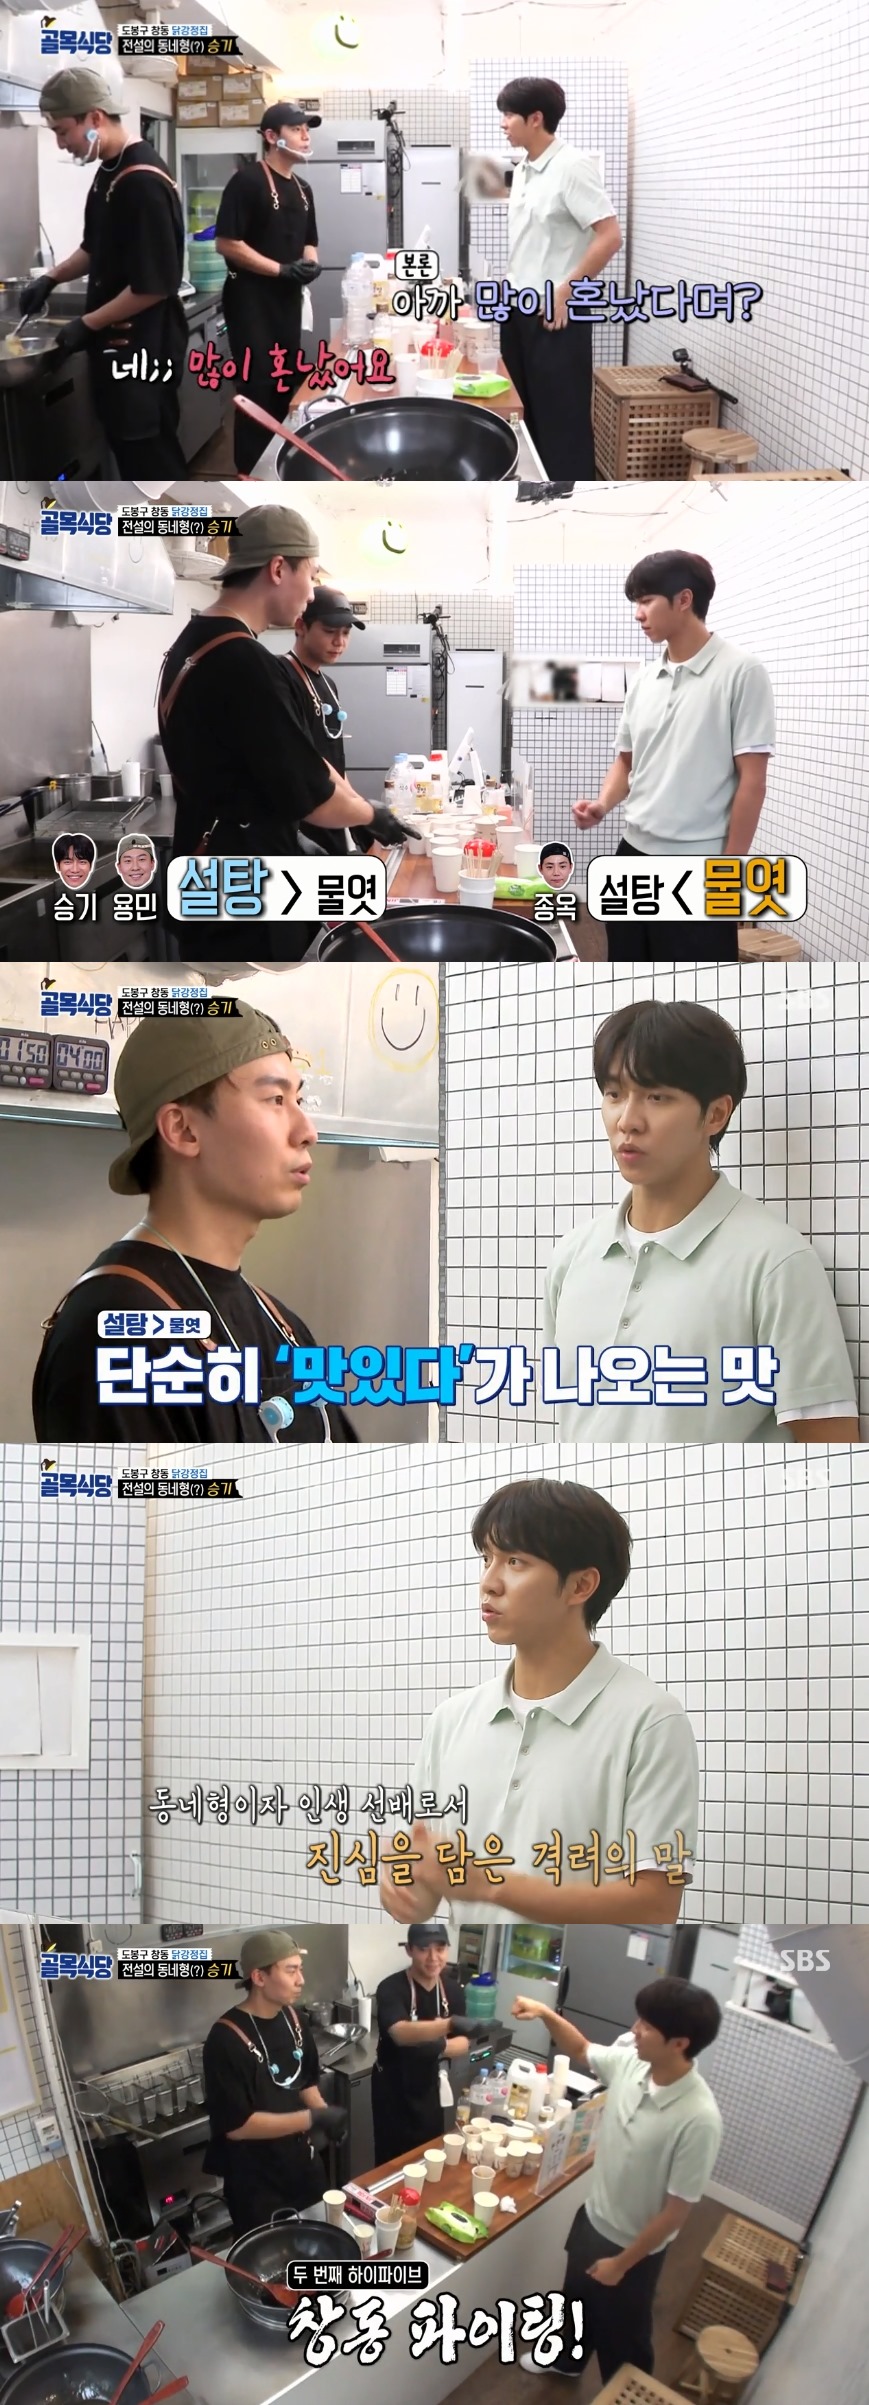 Lee Seung-gi and Cho Kyuhyun worked properly in search of the Chang-dong alley in Dobong District.The fourth episode of the 25th alley, Dobong District Chang-dong Alley, was unveiled at the SBS entertainment Baek Jong-wons The Alley Restaurant (hereinafter referred to as The Alley Restaurant) broadcast on the 26th.On this day, Baek Jong-won gave Lee Seung-gi a visit to the chicken gangjeong house.Baek Jong-won was angry about the use of garlic by the heads of chicken gangjeong. Baek Jong-won asked Lee Seung-gi to support the heads of chicken gangjeong instead of himself and find out what to point out.When Lee Seung-gi visited the chicken gang house, the two bosses greeted him with a big reaction. Lee Seung-gi said, Everyone is handsome.What is your age? Asked if he was a lot confused by Baek Jong-won, the boss said, I think it will tear me now.Its okay because were 100% wrong. Lee Seung-gi, to the bosses who continued to die, said, You do not have to apologize to me, I am a guest.The Chang-dong native turned the story to the talk of the festival and said, It is so nice to meet my juniors. Call me brother.The two bosses, who were studying the sugar and starch syrup ratio of the sauce, presented three versions of chicken gangster to Lee Seung-gi.After the tasting, Lee Seung-gi had time to choose the best version of chicken Gangjeong with the bosses: two sugars and one starch syrup are divided.Lee Seung-gi asked, Is chicken important in chicken gangjeong or sugar important? If chicken is first, I will choose a sugary side.It seems to be good because the sugar side is crisp on the outside and the inside can feel the taste of the chicken, he said. It is hard to get a high percentage of syrup.MCs who watched this were student chairman style and admired Lee Seung-gis behavior.I have an opposite opinion, so I listen to it and taste it again, and if I were like me, I would have finished it, said Baek Jong-won.Lee Seung-gi, who left the chicken gang house, said, I think it would be nice to accept Mr. Baek and grow more. Successful people are not successful.It is possible enough. He once again told the two bosses that he was trying to calculate, and the bosses did not turn on the force.Lee Seung-gi then took out two books of Oman and said, I will just pay in cash.When the bosses said there were too many, Lee Seung-gi said, I want to give more, but I want to give more.If you have too much left, buy more ingredients with it and practice more. He boasted of his warm-hearted neighborhood until the end.On the other hand, Cho Kyuhyun visited the NO delivery Pizza house with the invitation of Baek Jong-won.Singer-songwriter Hong Seok-min and Cho Kyuhyun, who visited the store, ordered tuna pizza and salami pizza.Cho Kyuhyun, who sampled the tuna pizza, said, Ive never eaten a pizza with a tuna, but I do not feel it, but its not even impressive.Cho Kyuhyun then tasted Salami Pizza and pointed out that pepper oil remains thick in your mouth if you are wrong.Cho Kyuhyun, who gave a cool assessment, also pointed out that there are too many toppings on Pizza.Baek Jong-won, who watched this in the situation room, called Cho Kyuhyun and praised him for I saw it correctly, saying, The topping is separated and the pepper oil is so thick that toppings are too many.Tell Fabry to keep the quantity as you learned and make Pizza. On Cho Kyuhyuns advice, the boss made Pizza again as Fabrys recipe; Cho Kyuhyun, who sampled Pizza again, was surprised and said, Its completely different from the previous one.It tastes like other ingredients. Its so delicious. I love balance. Photo = SBS Broadcasting Screen